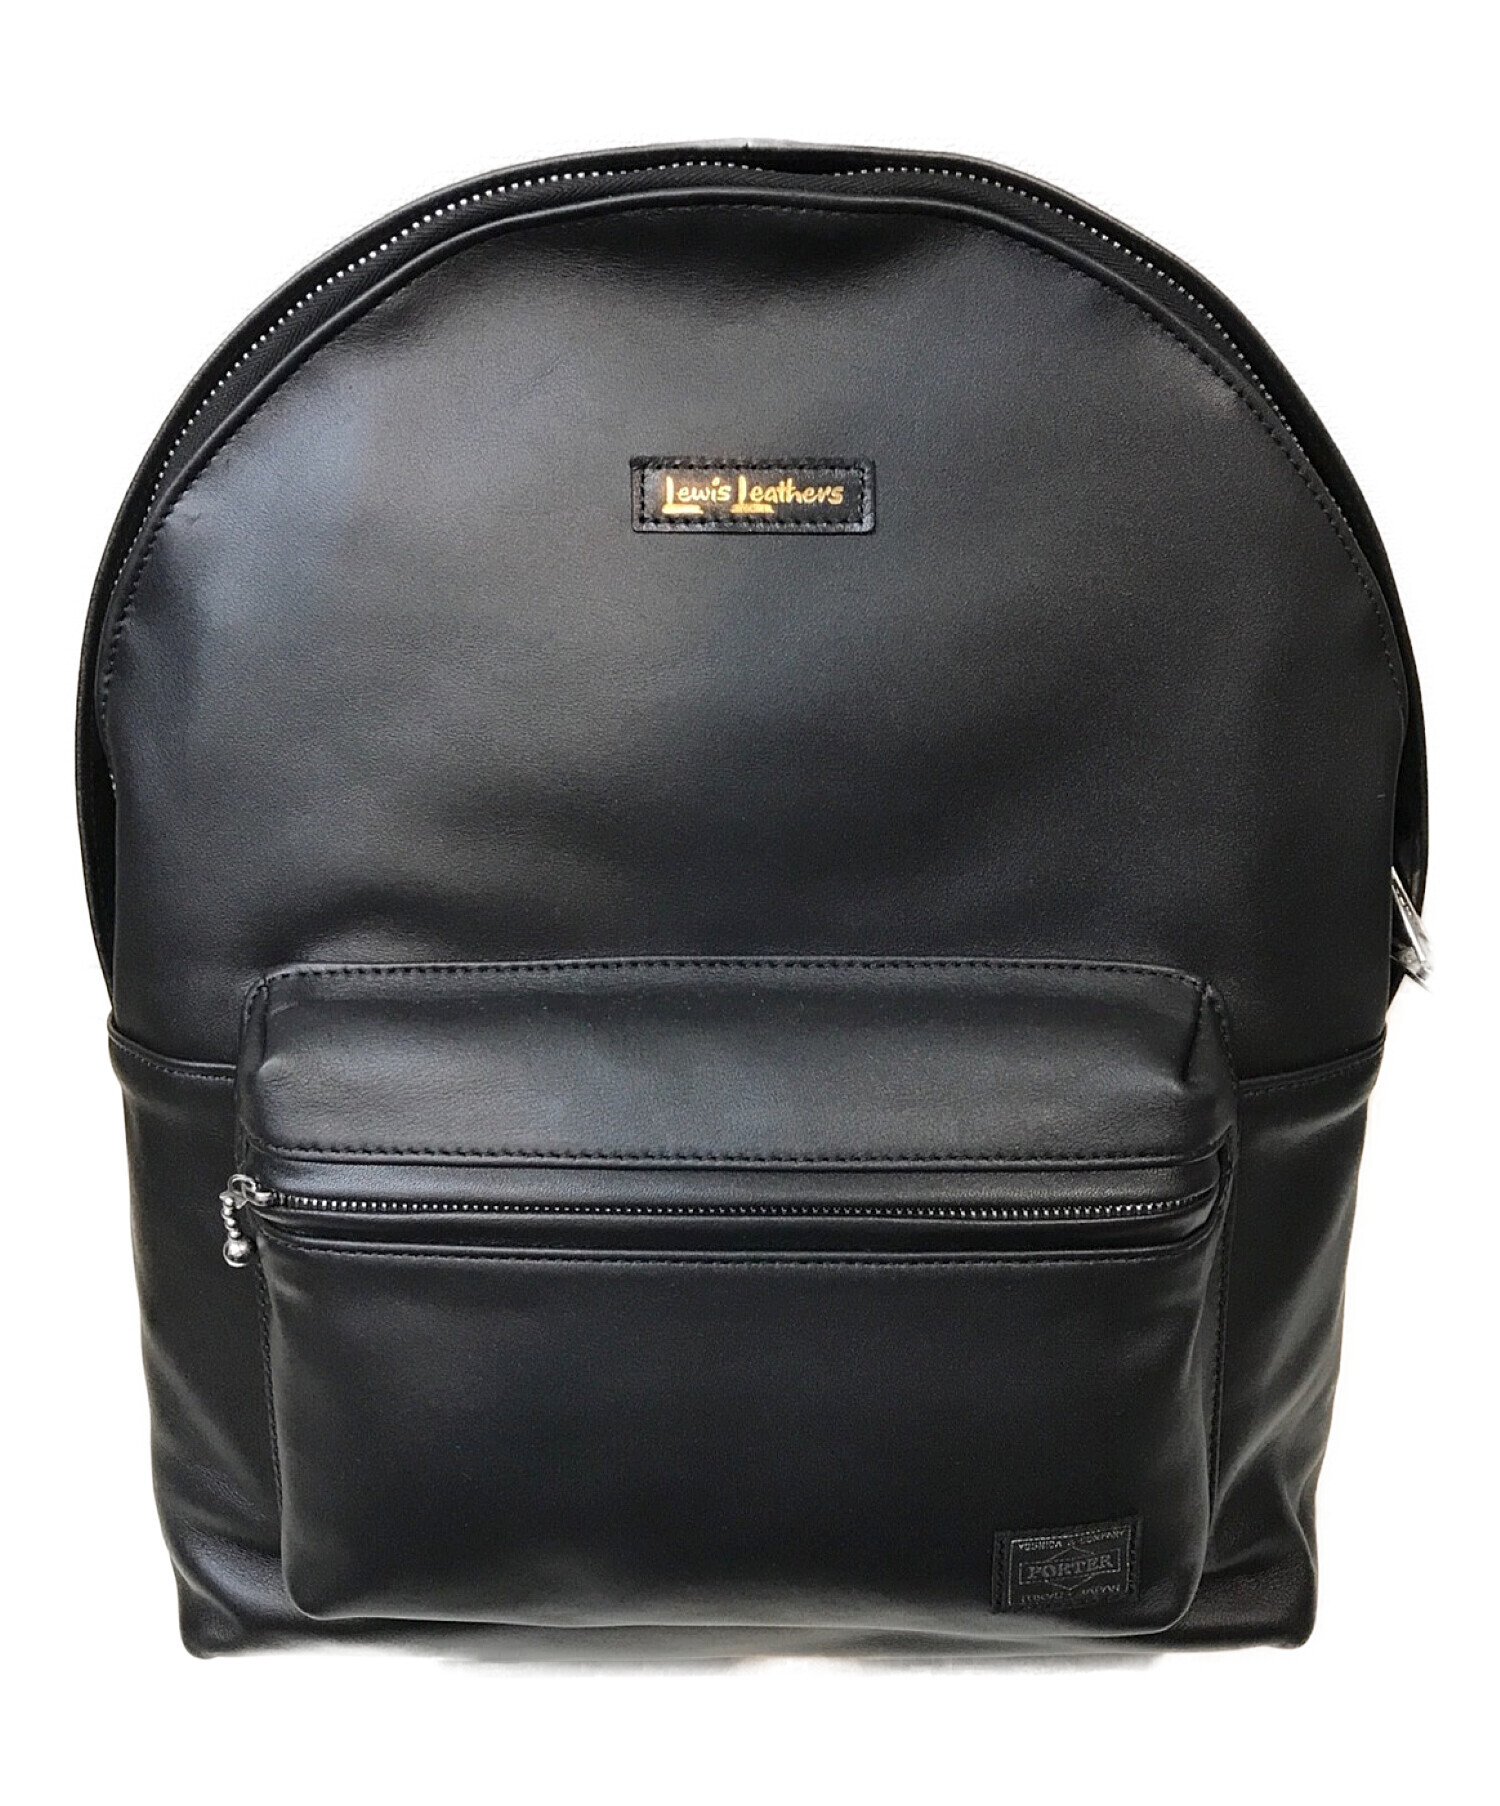 Lewis Leathers×PORTER (ルイスレザーズ × ポーター) Leather Day Pack ブラック